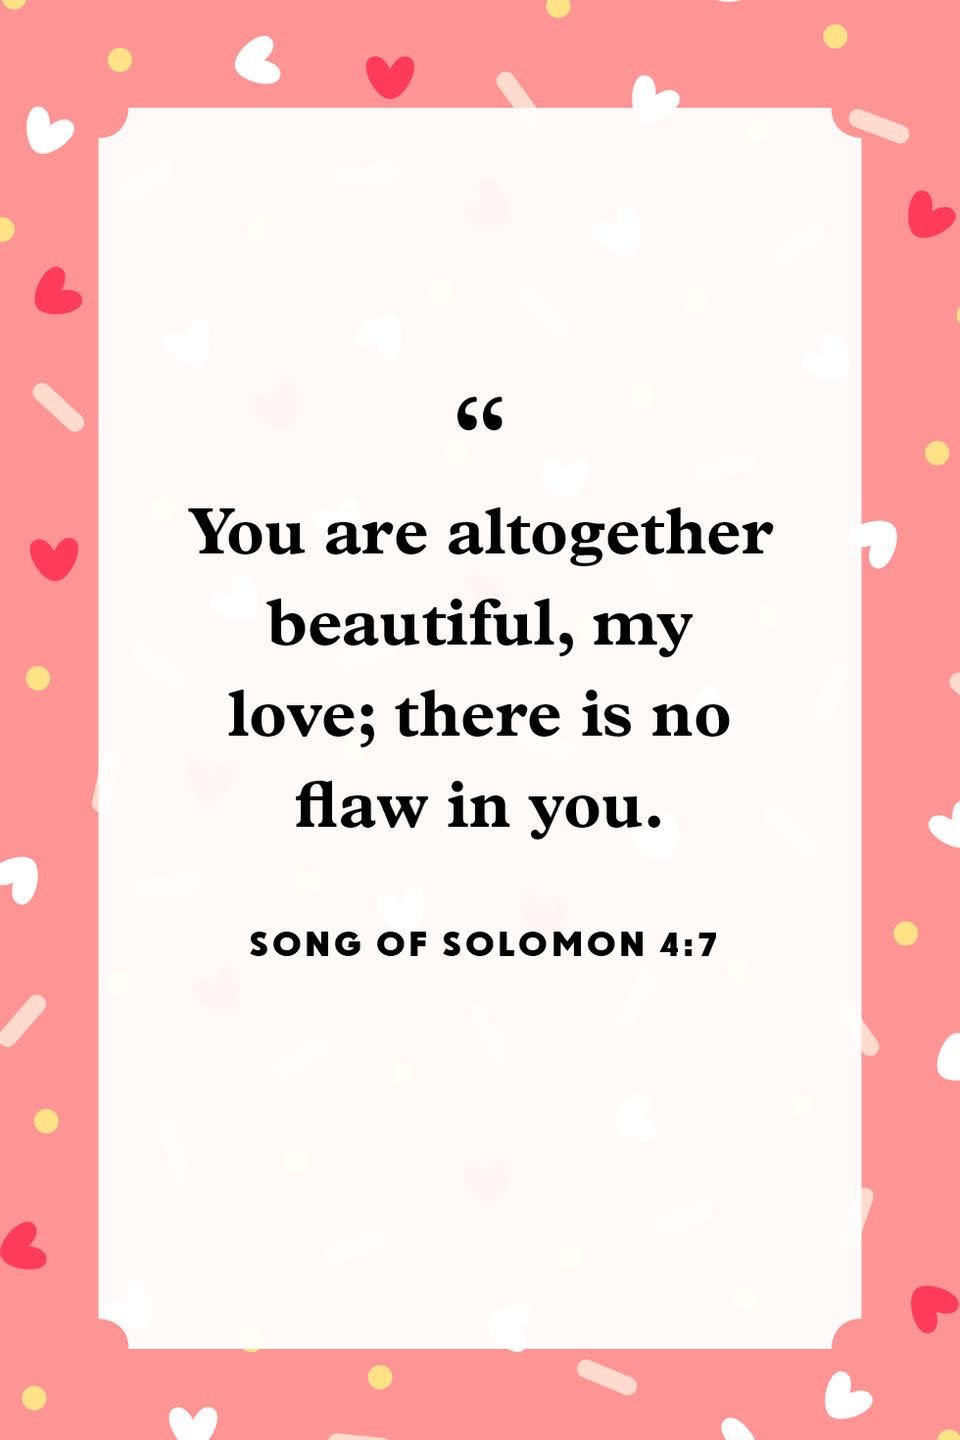 <p>"You are altogether beautiful, my love; there is no flaw in you."</p>